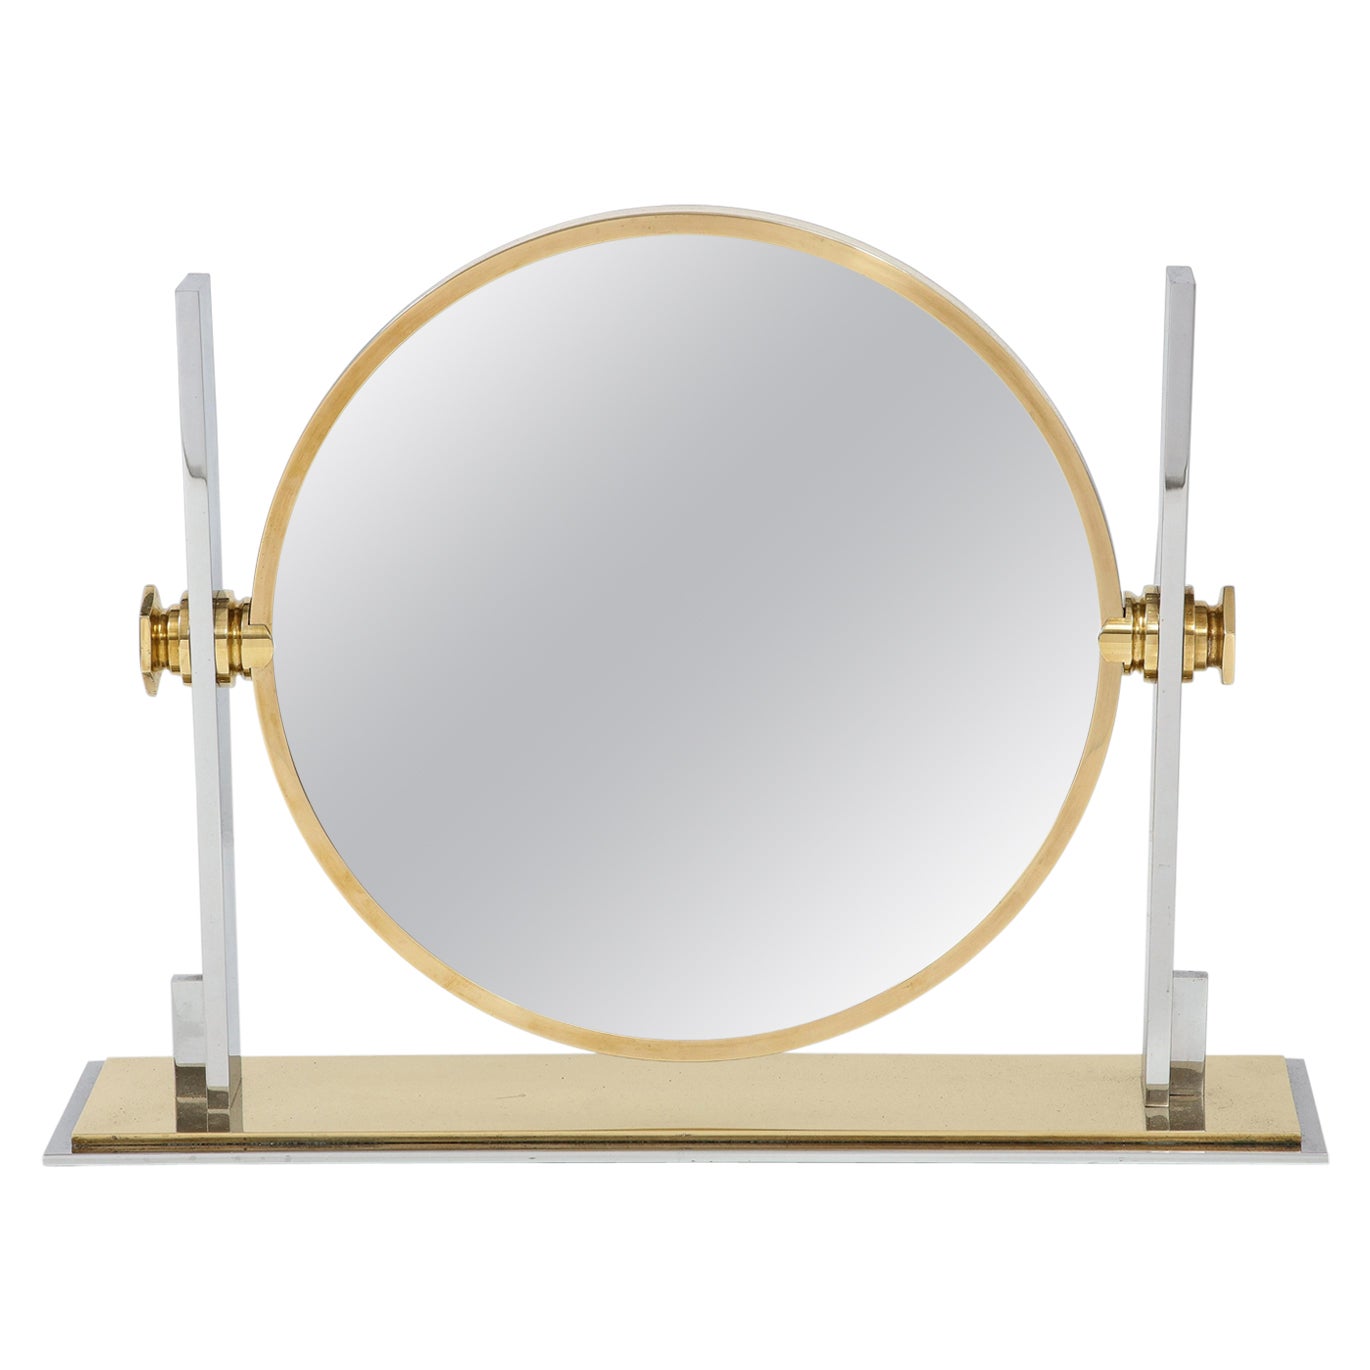 Karl Springer Large Vanity Mirror in Brass and Chrome, USA, 1980s For Sale